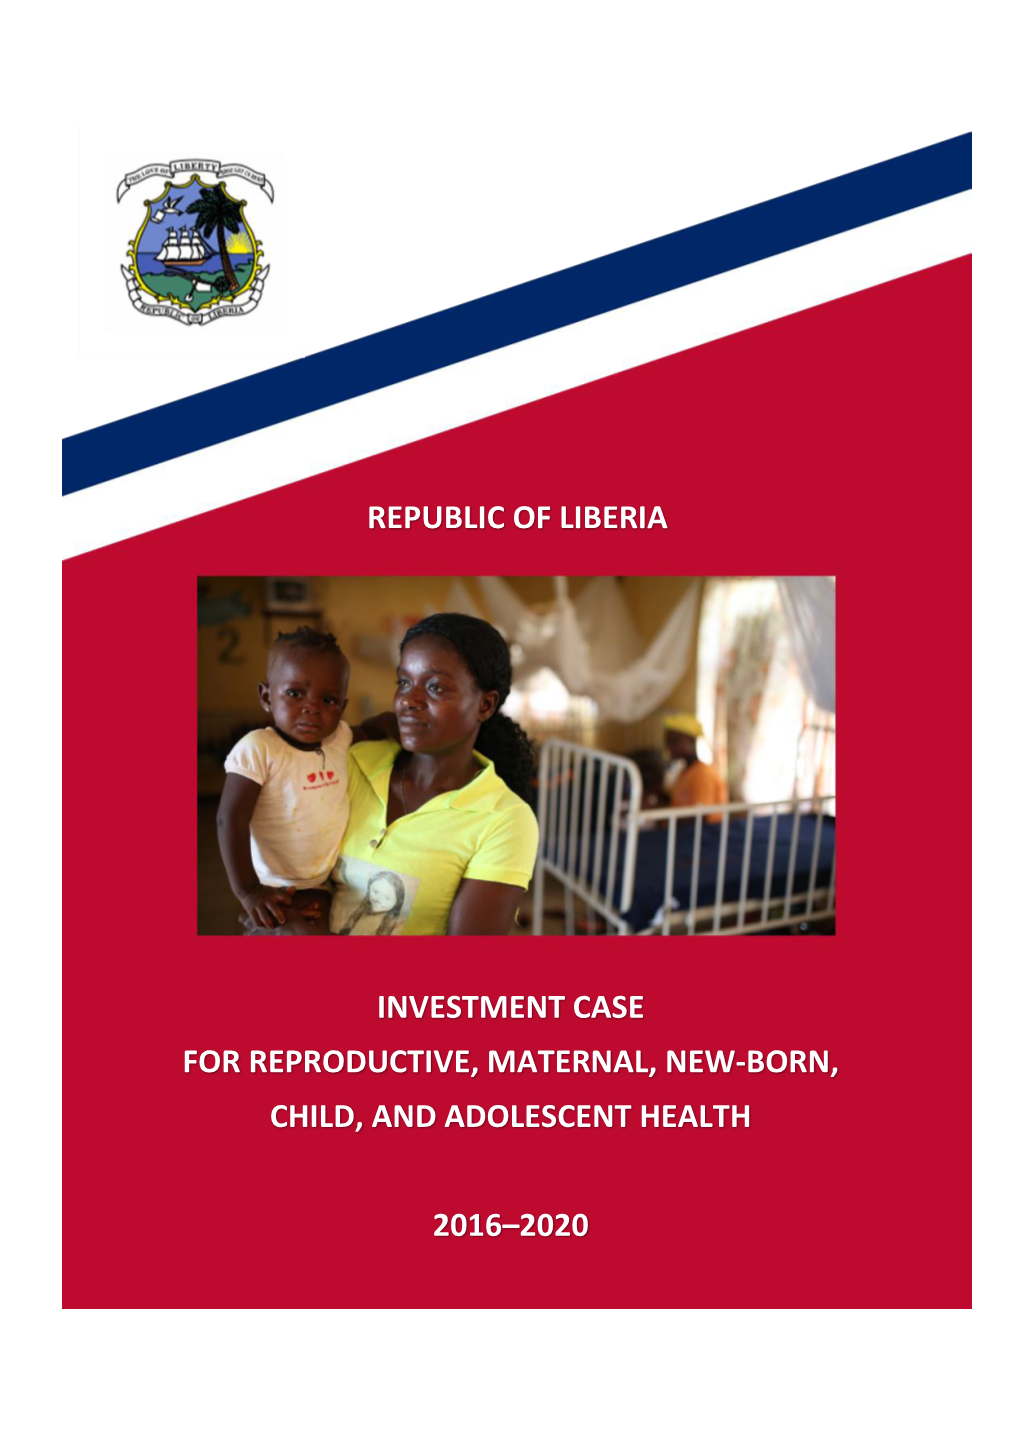 Republic of Liberia Investment Case for Reproductive, Maternal, New-Born